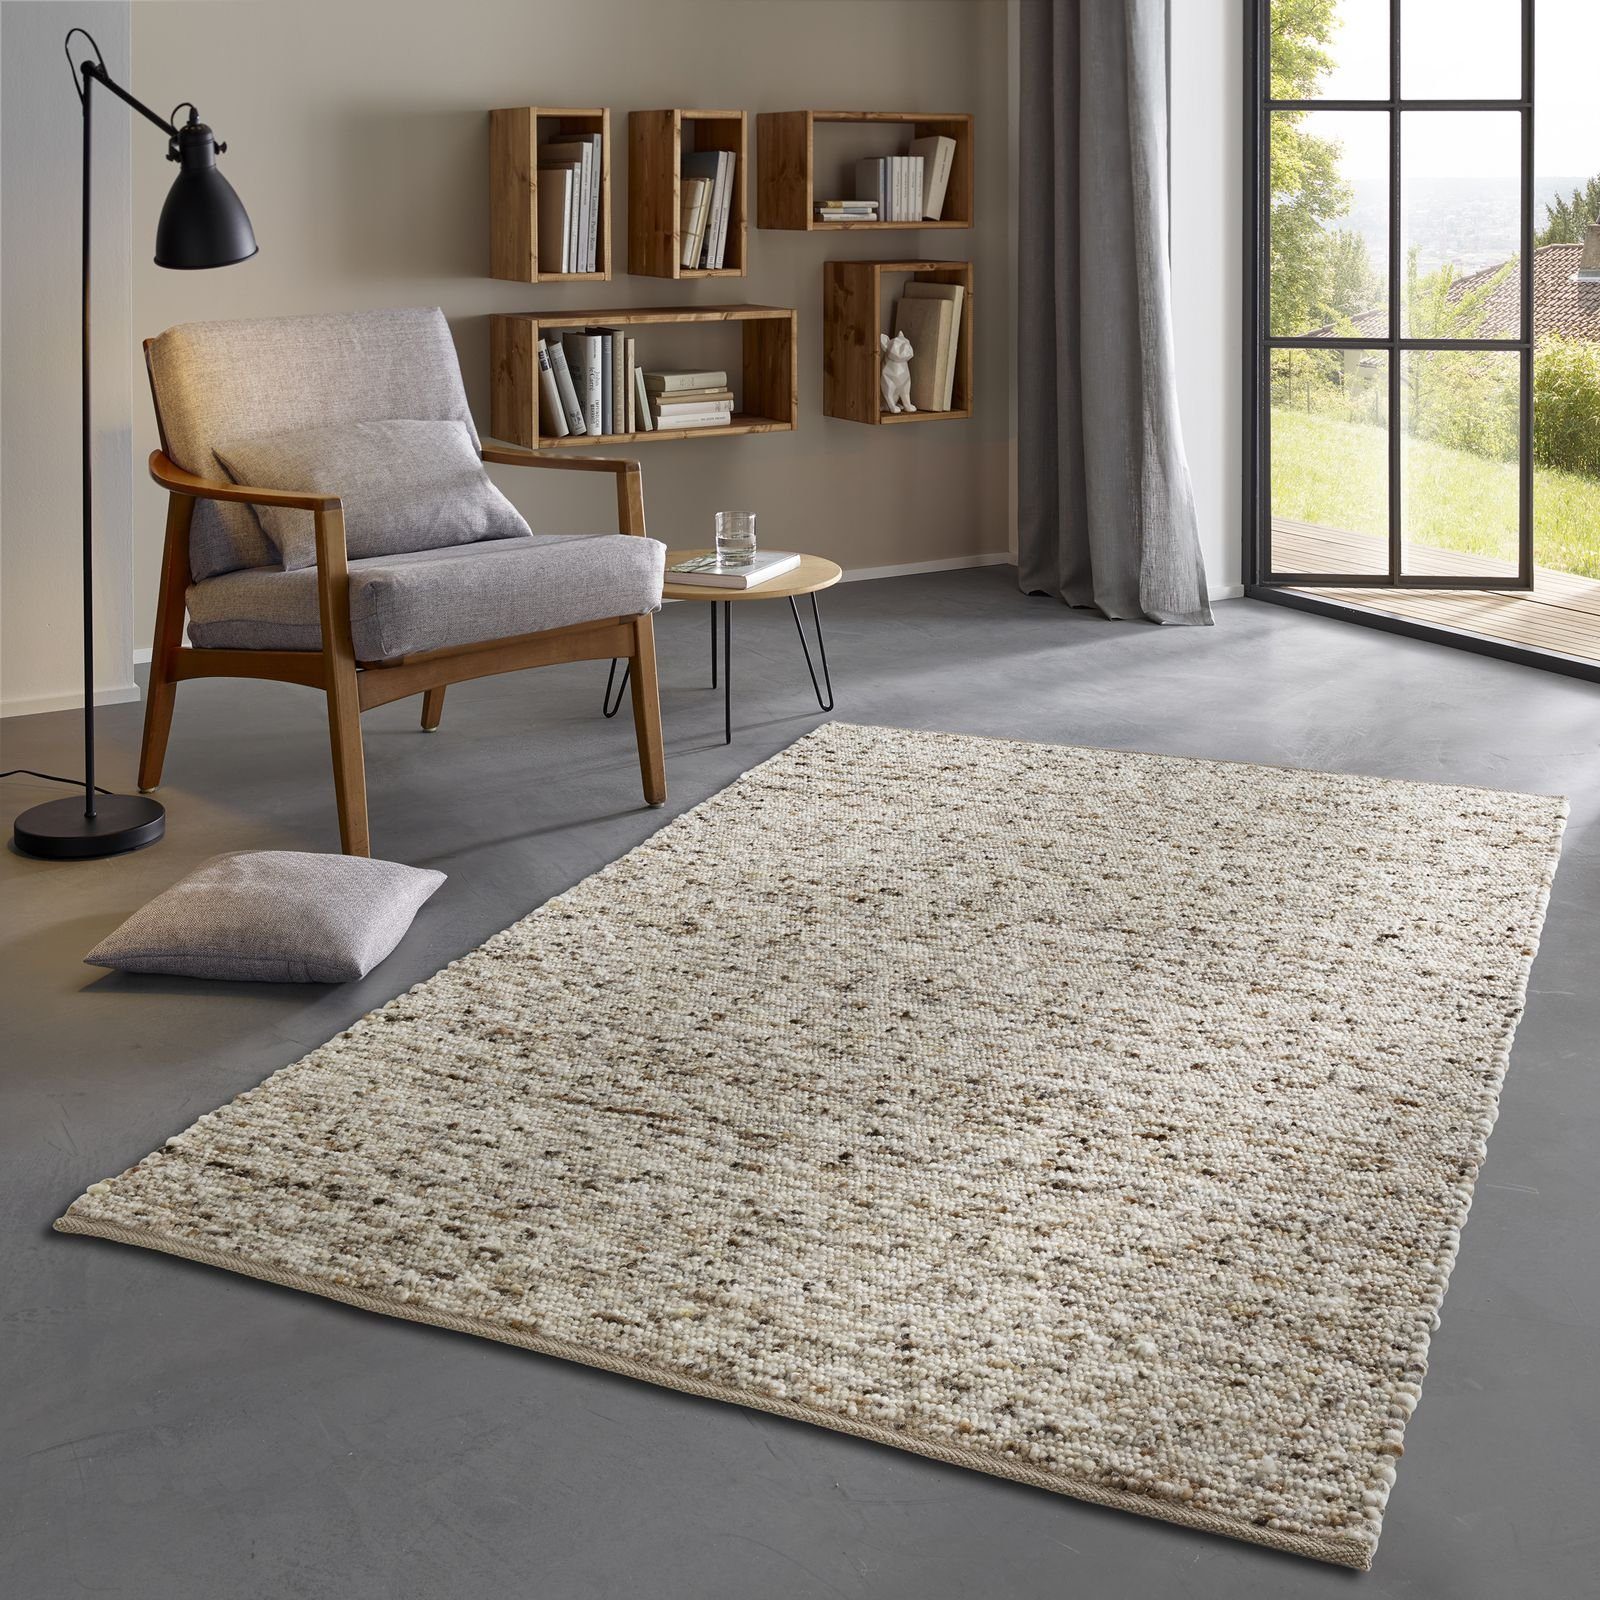 Durable Outdoor Area Rugs with Premium Bound Edges. 